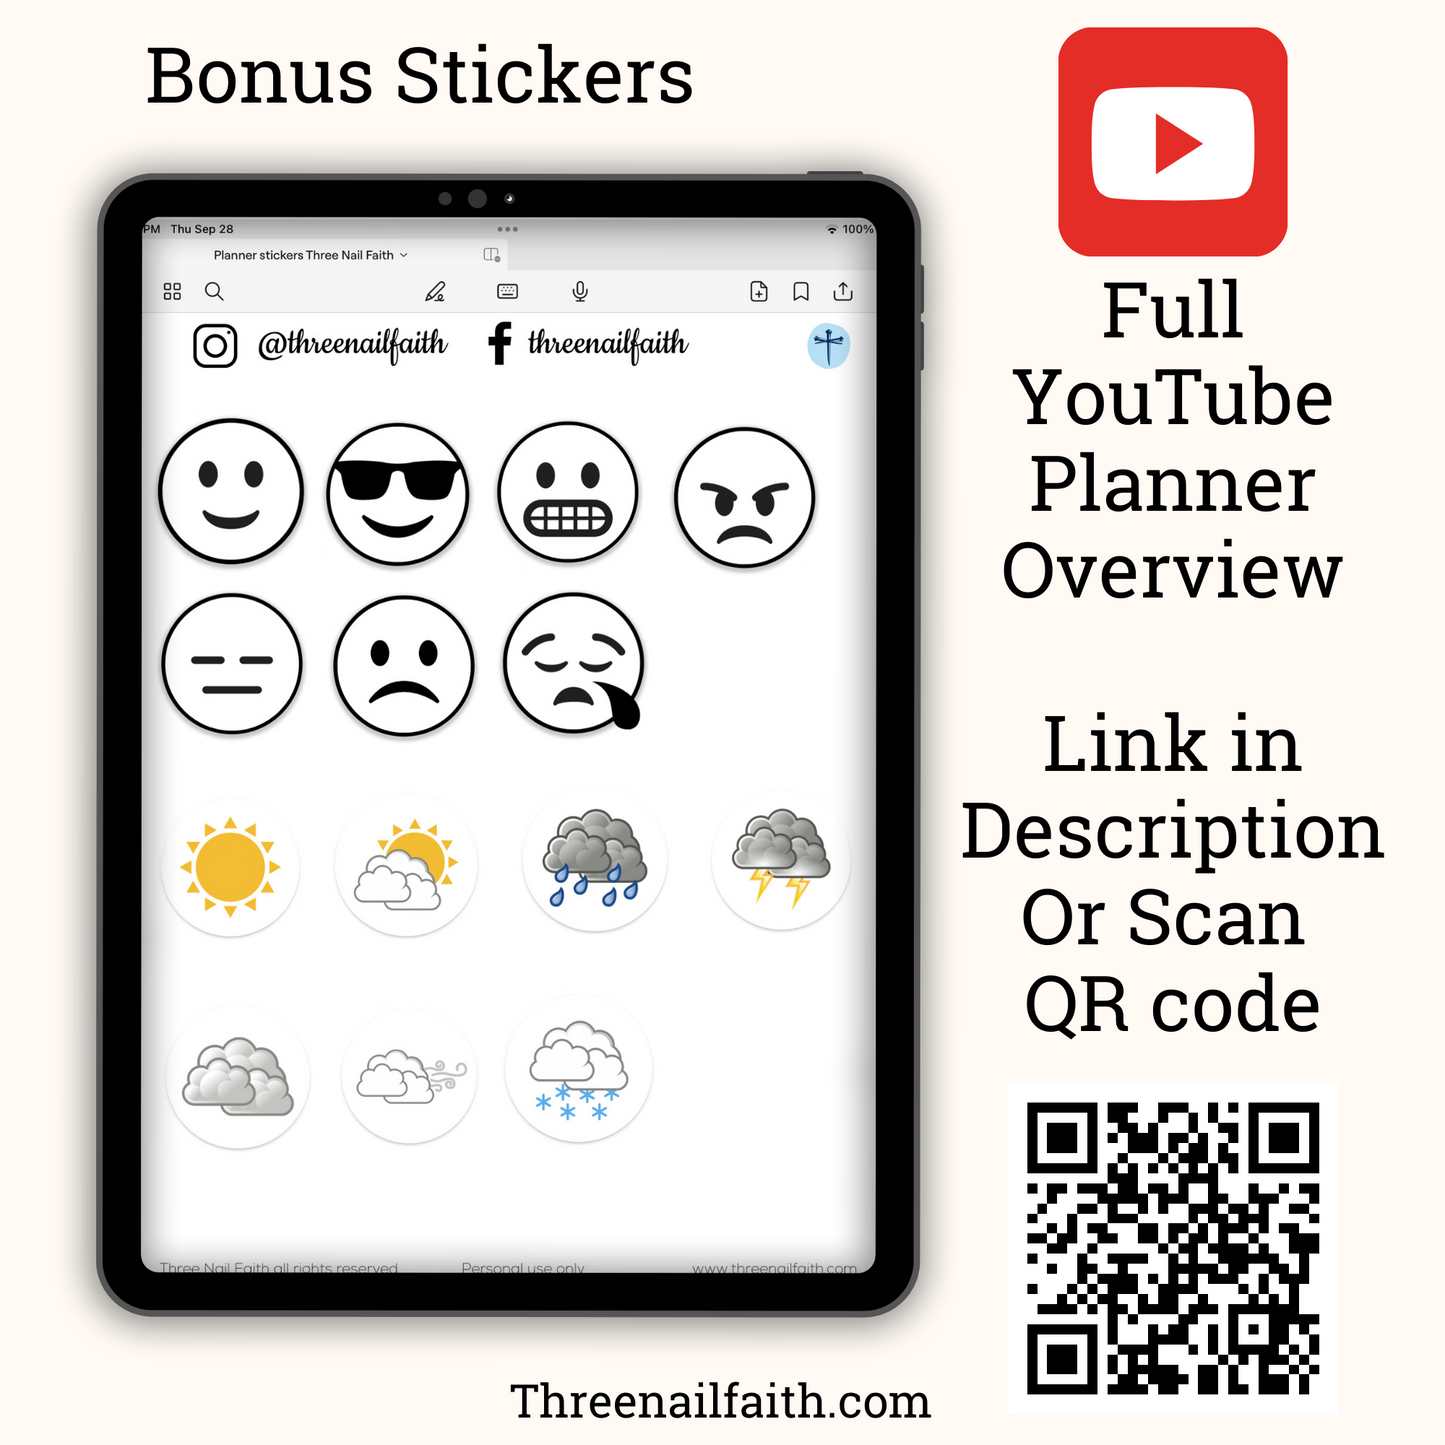 Extra stickers included with planner